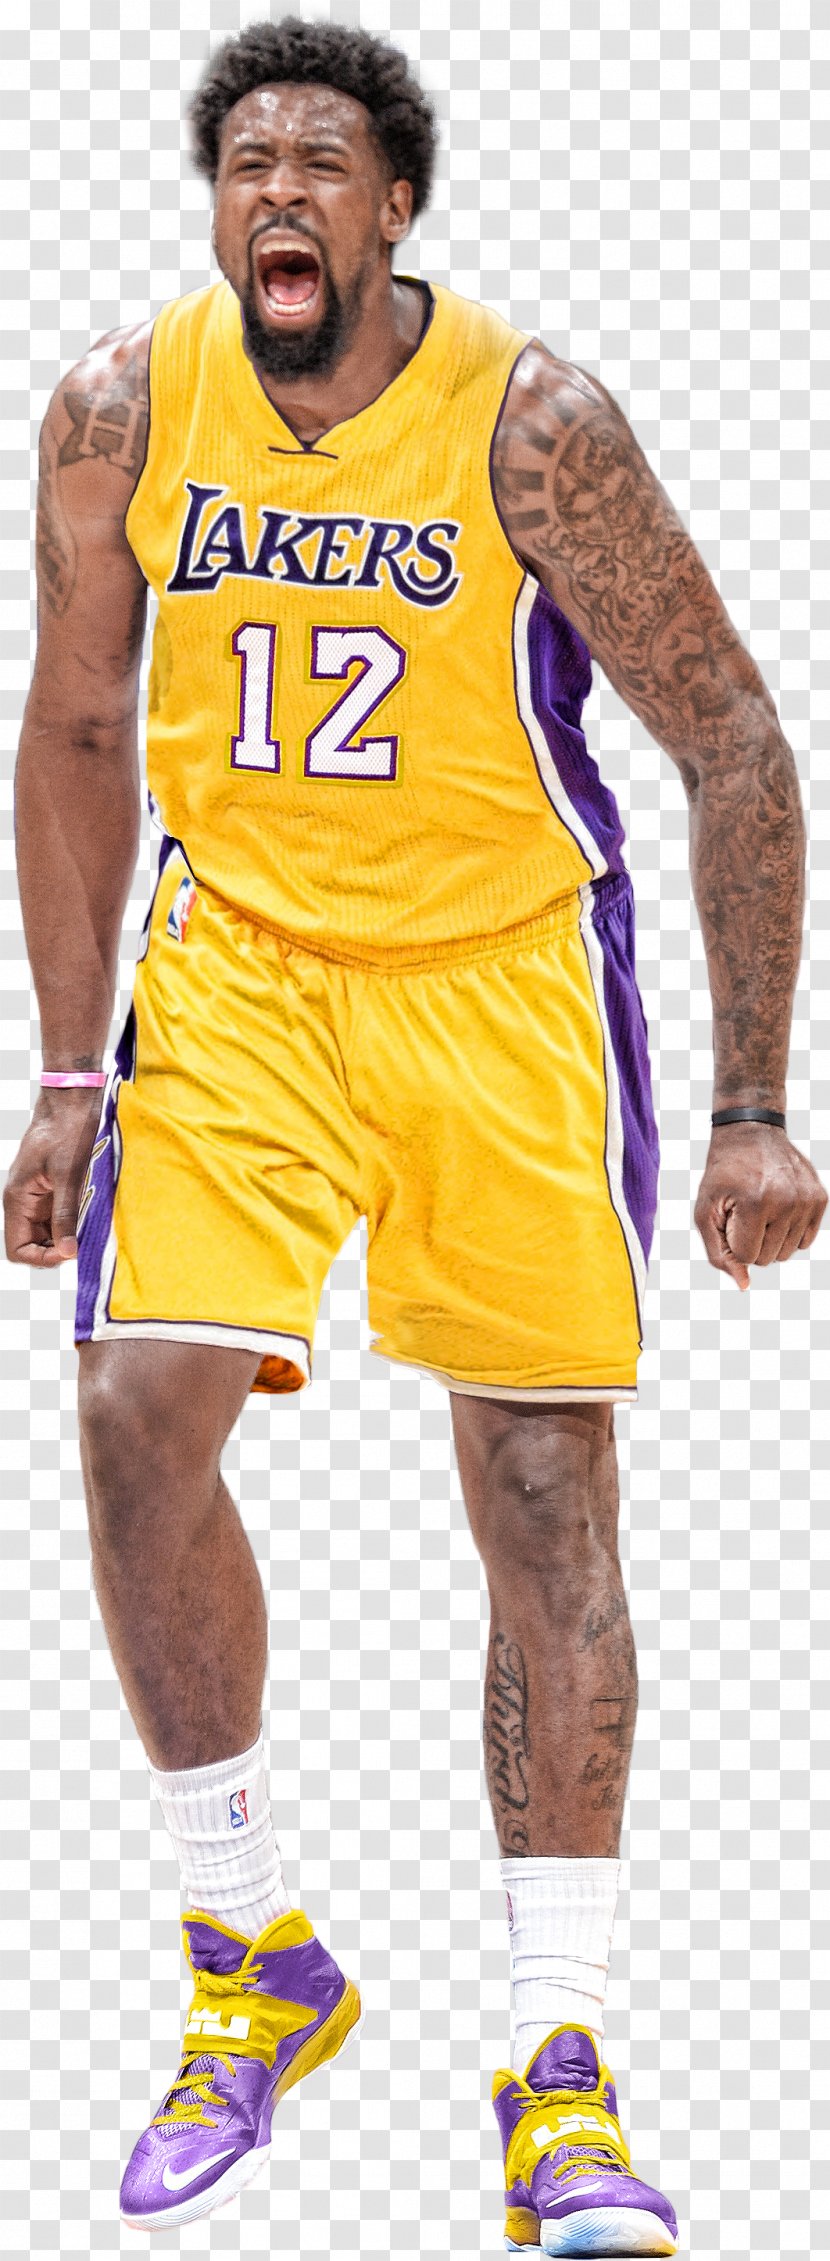 D'Angelo Russell Jersey Los Angeles Lakers Basketball Player 2014–15 NBA Season - Deandre Jordan - Ohio State Buckeyes Mens Transparent PNG